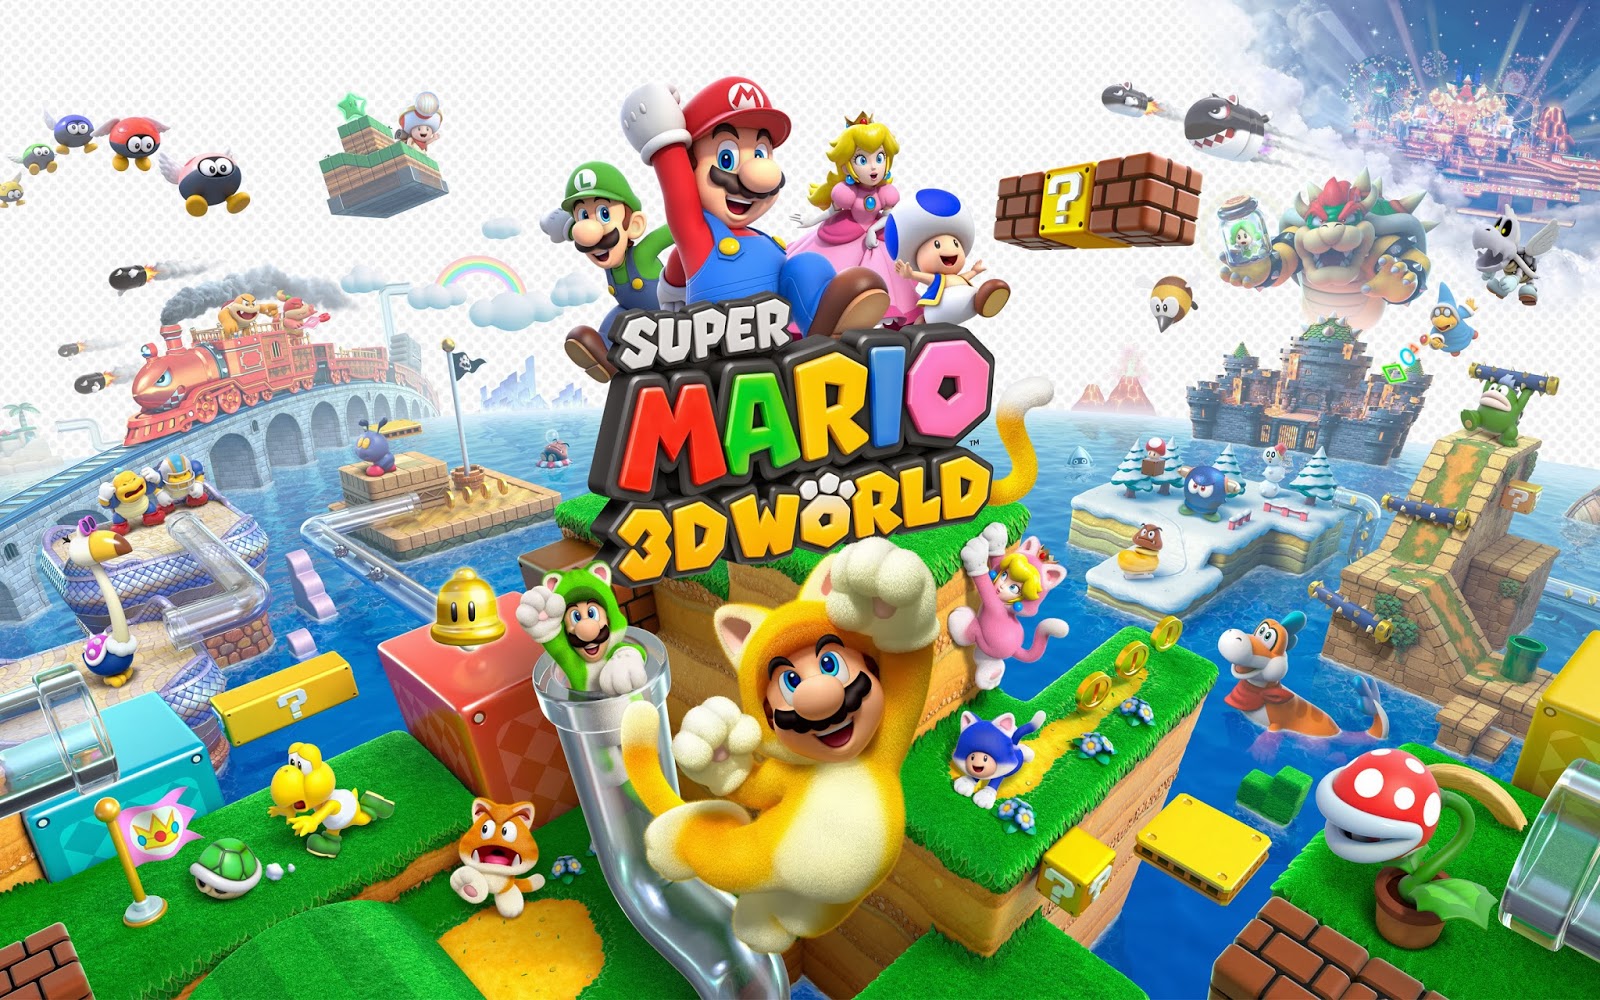 mario games online for free on the world wide web